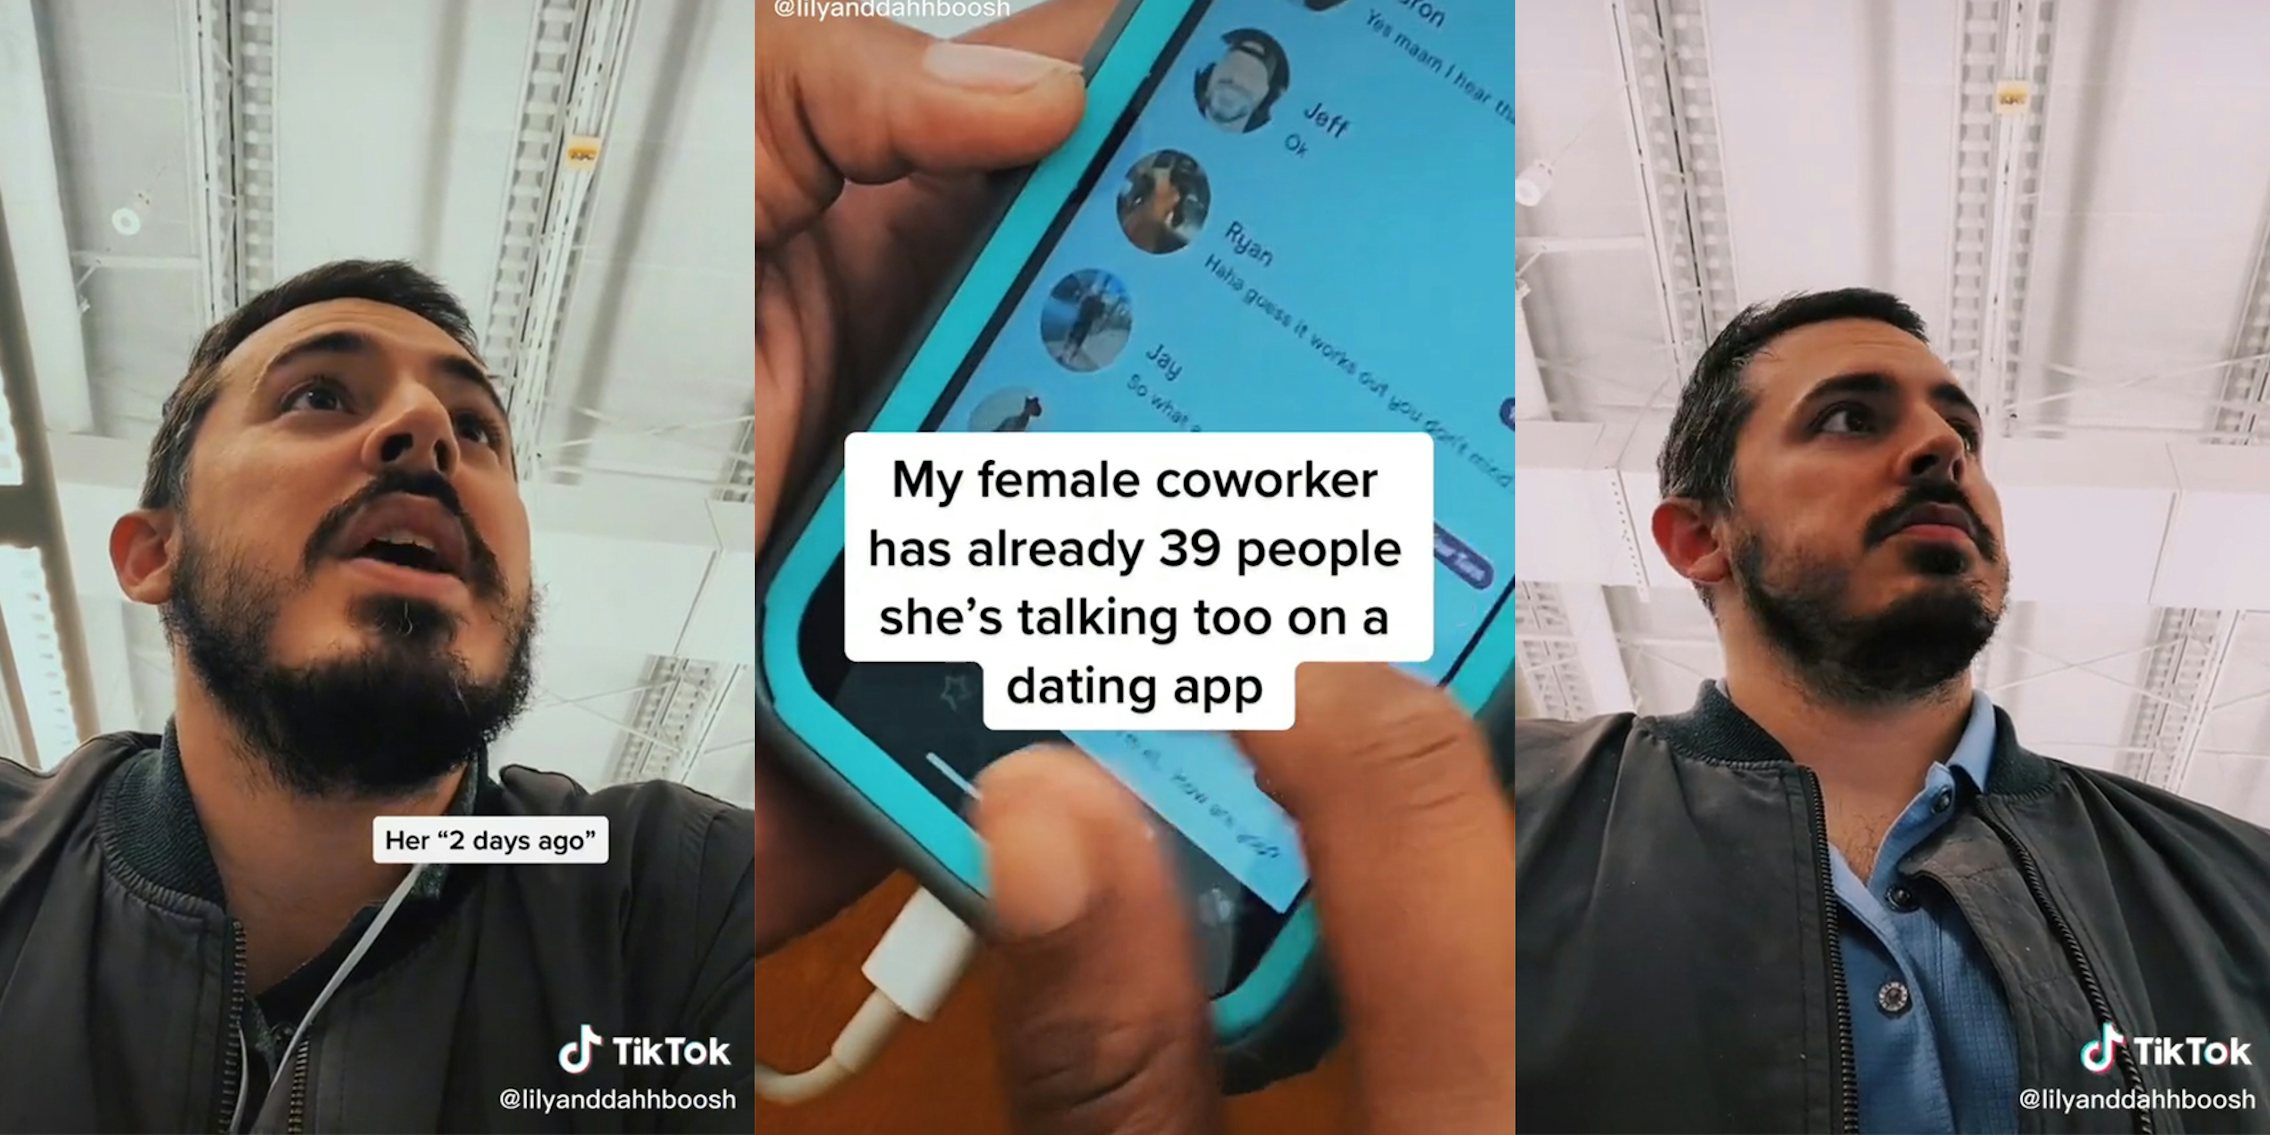 man in office with caption 'Her *2 days ago' (l) woman holding phone with dating app and caption 'My female coworker has already 39 people she's talking too on a dating app' (c) man in office with look of disbelief(r)